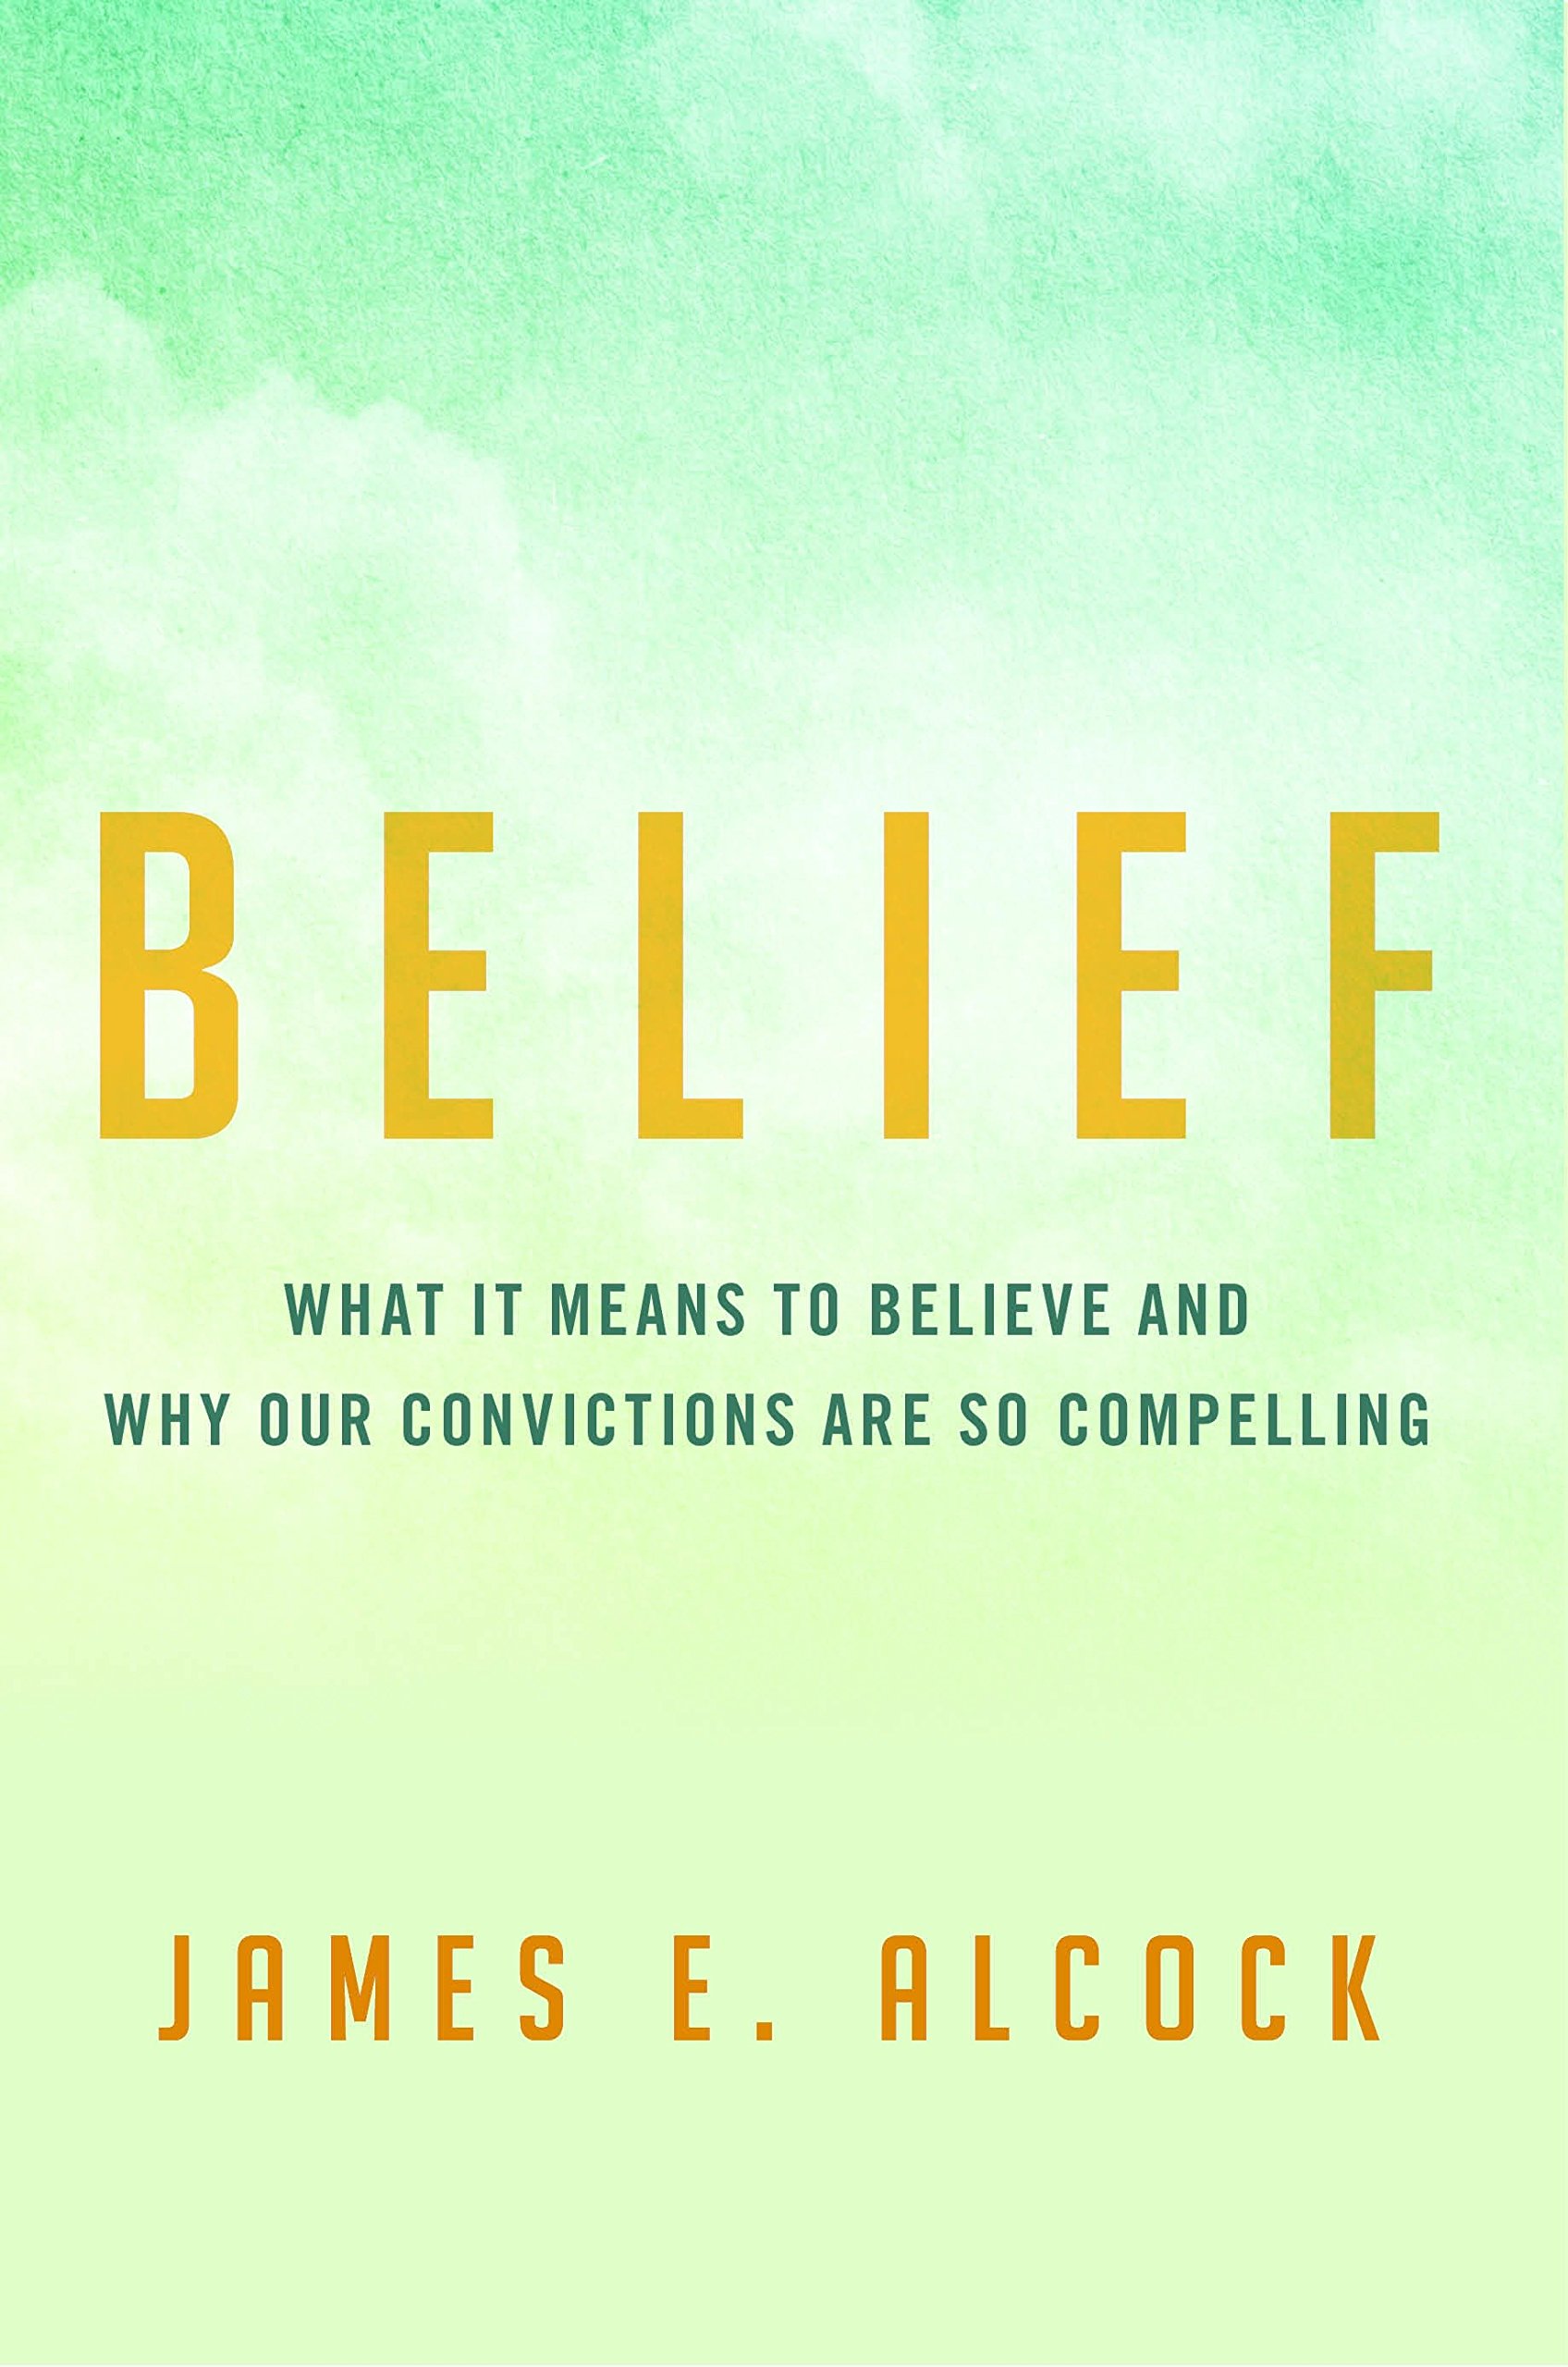 Belief: What It Means to Believe and Why Our Convictions Are So Compelling